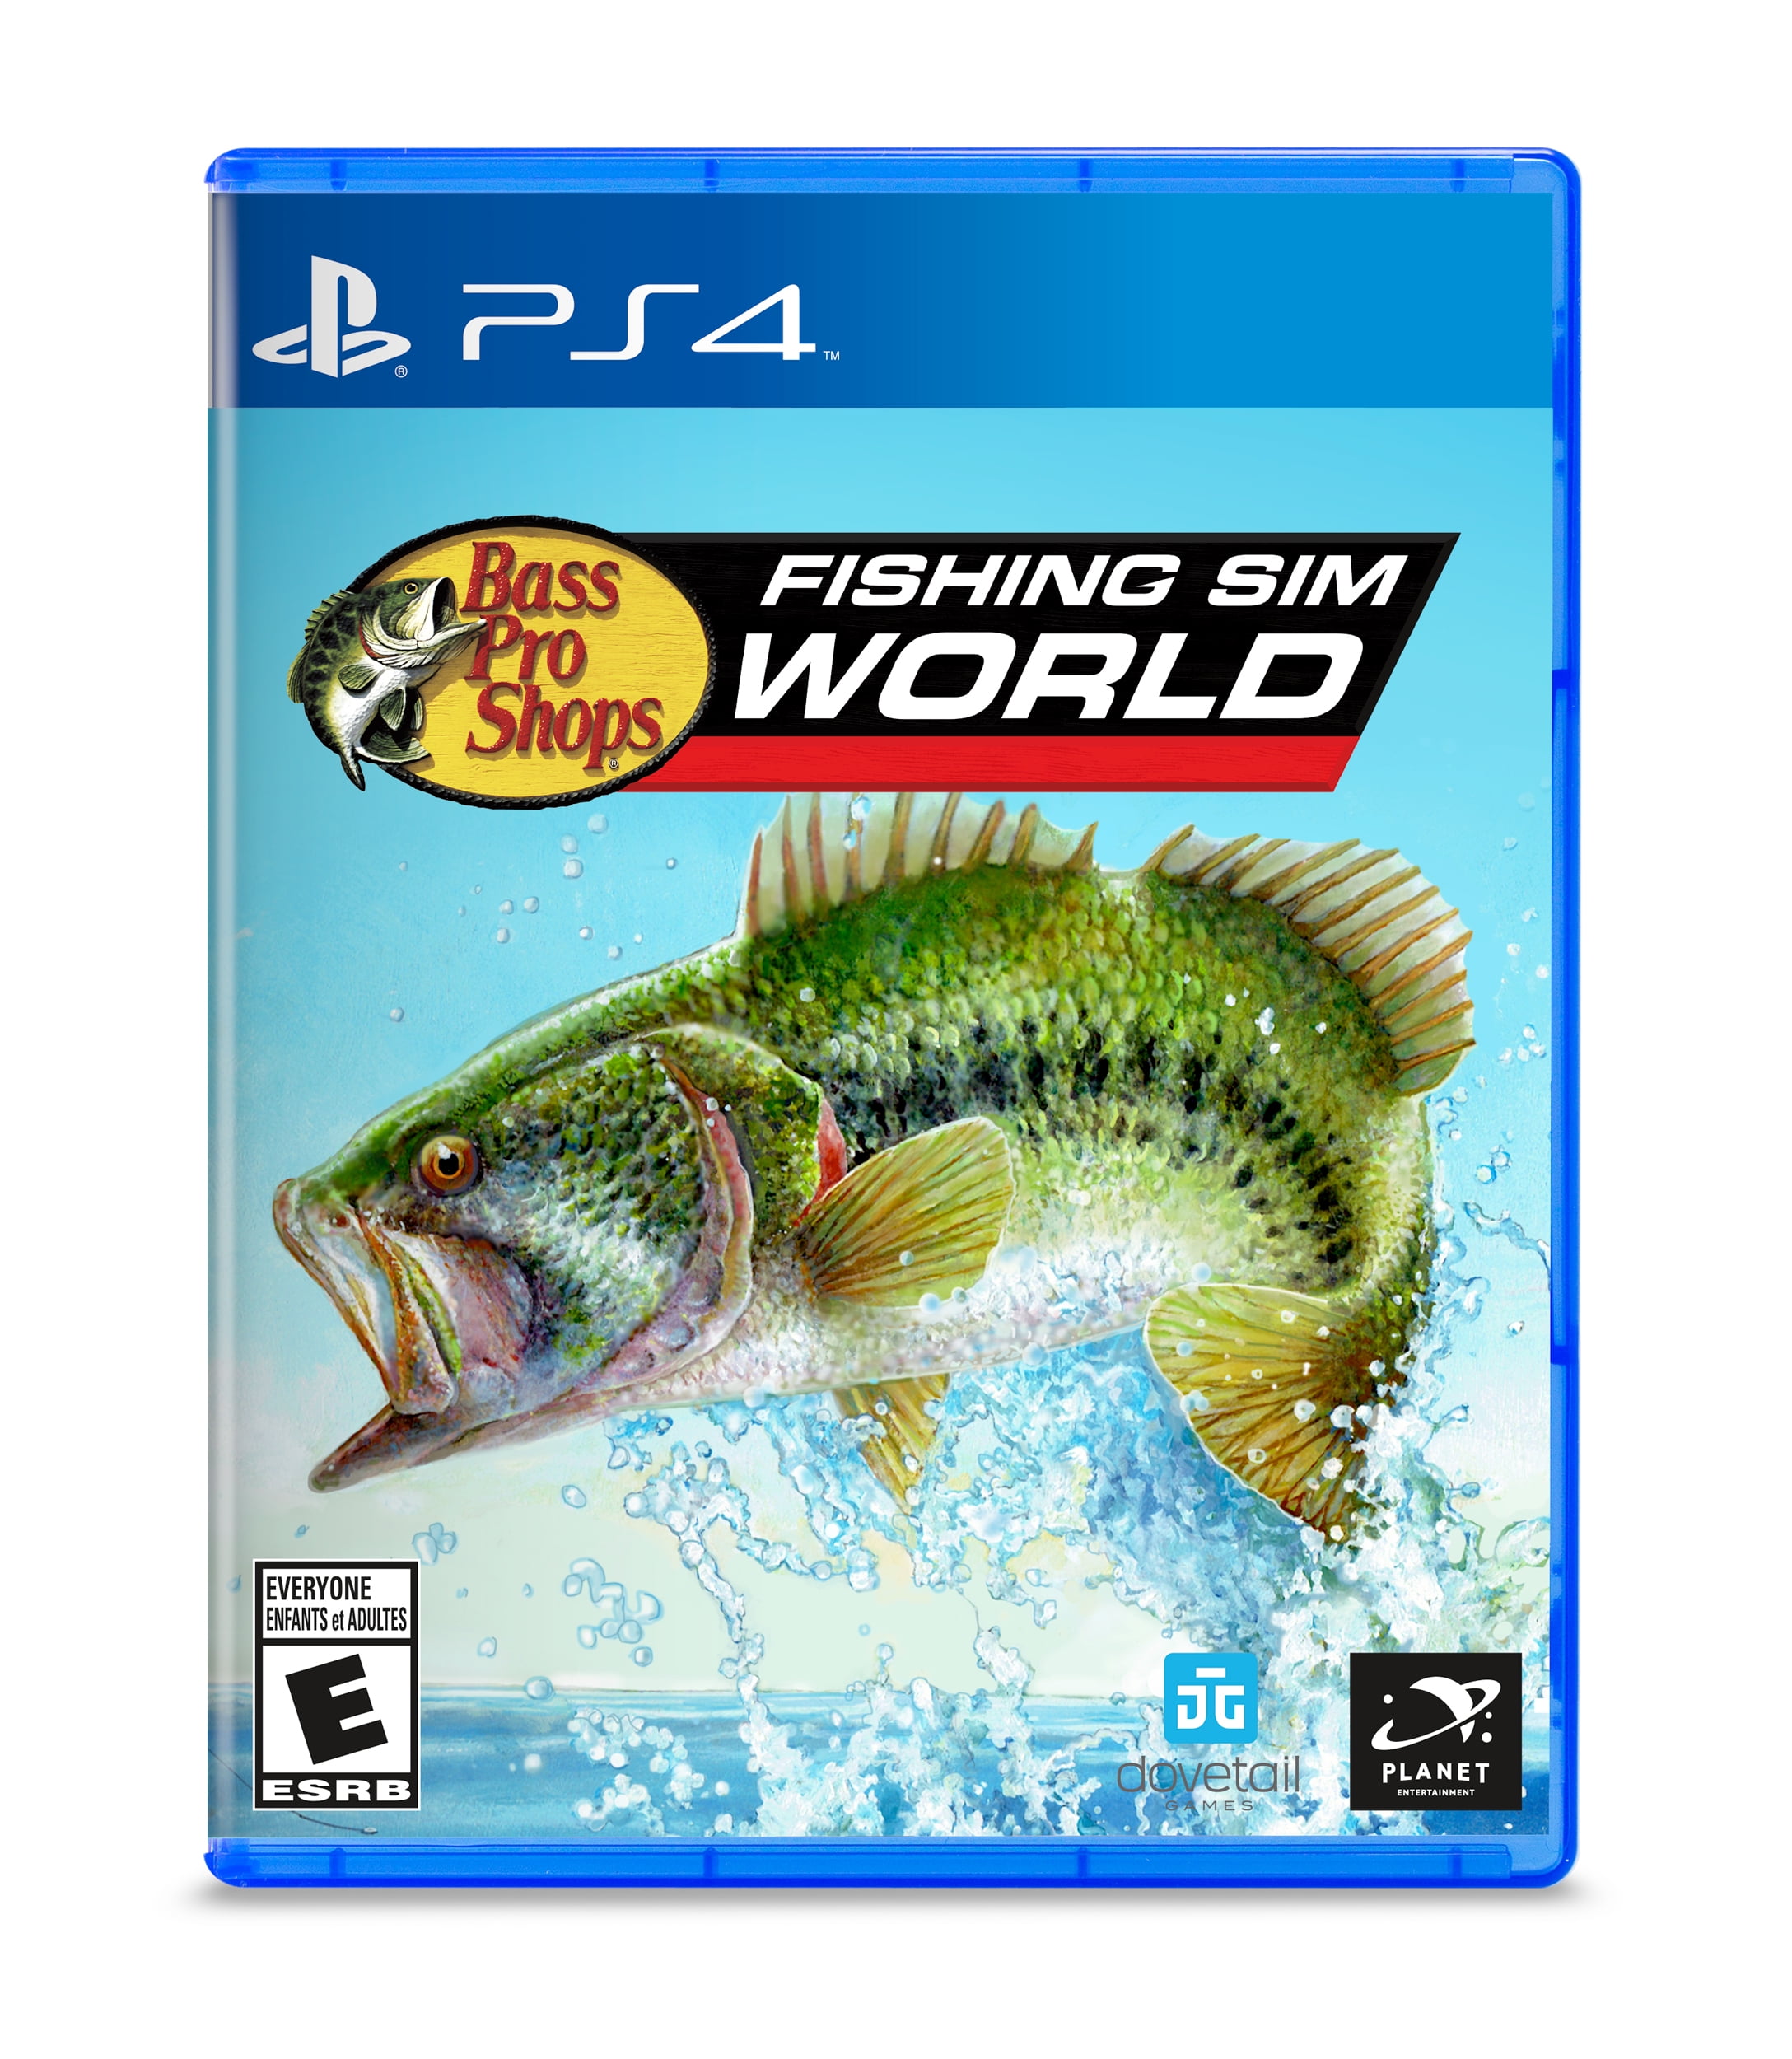 Bass Pro Shops Fishing Sim World Video Game For PlayStation, 44% OFF